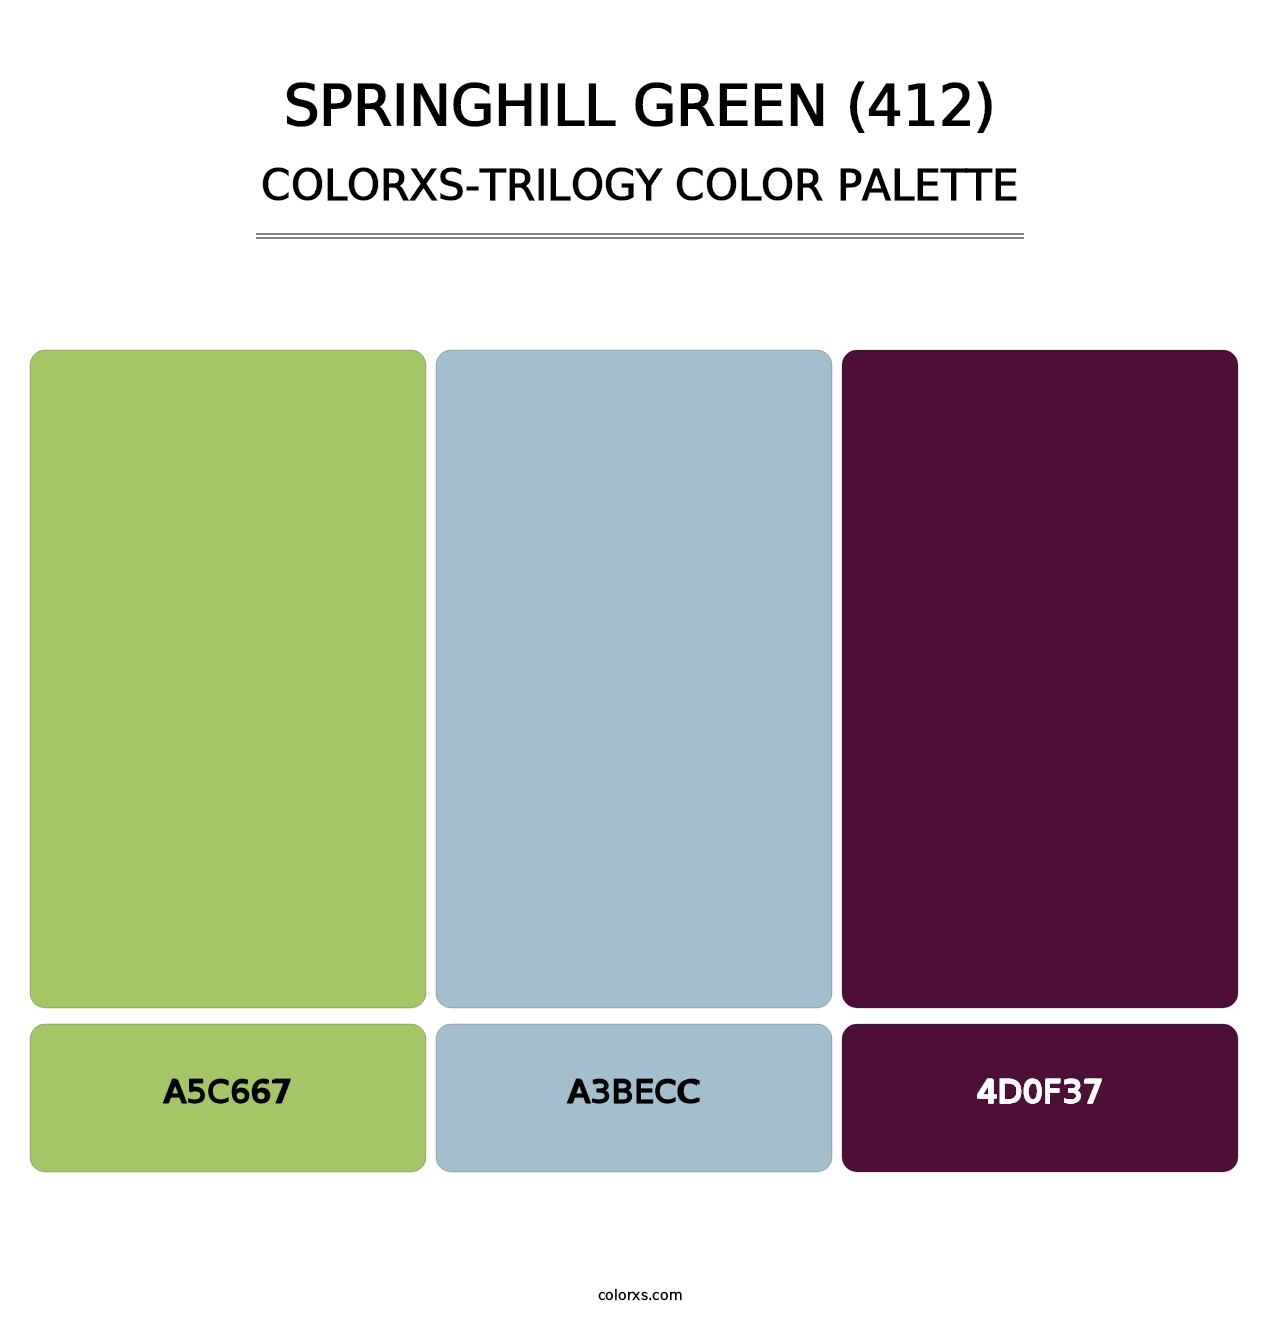 Springhill Green (412) - Colorxs Trilogy Palette